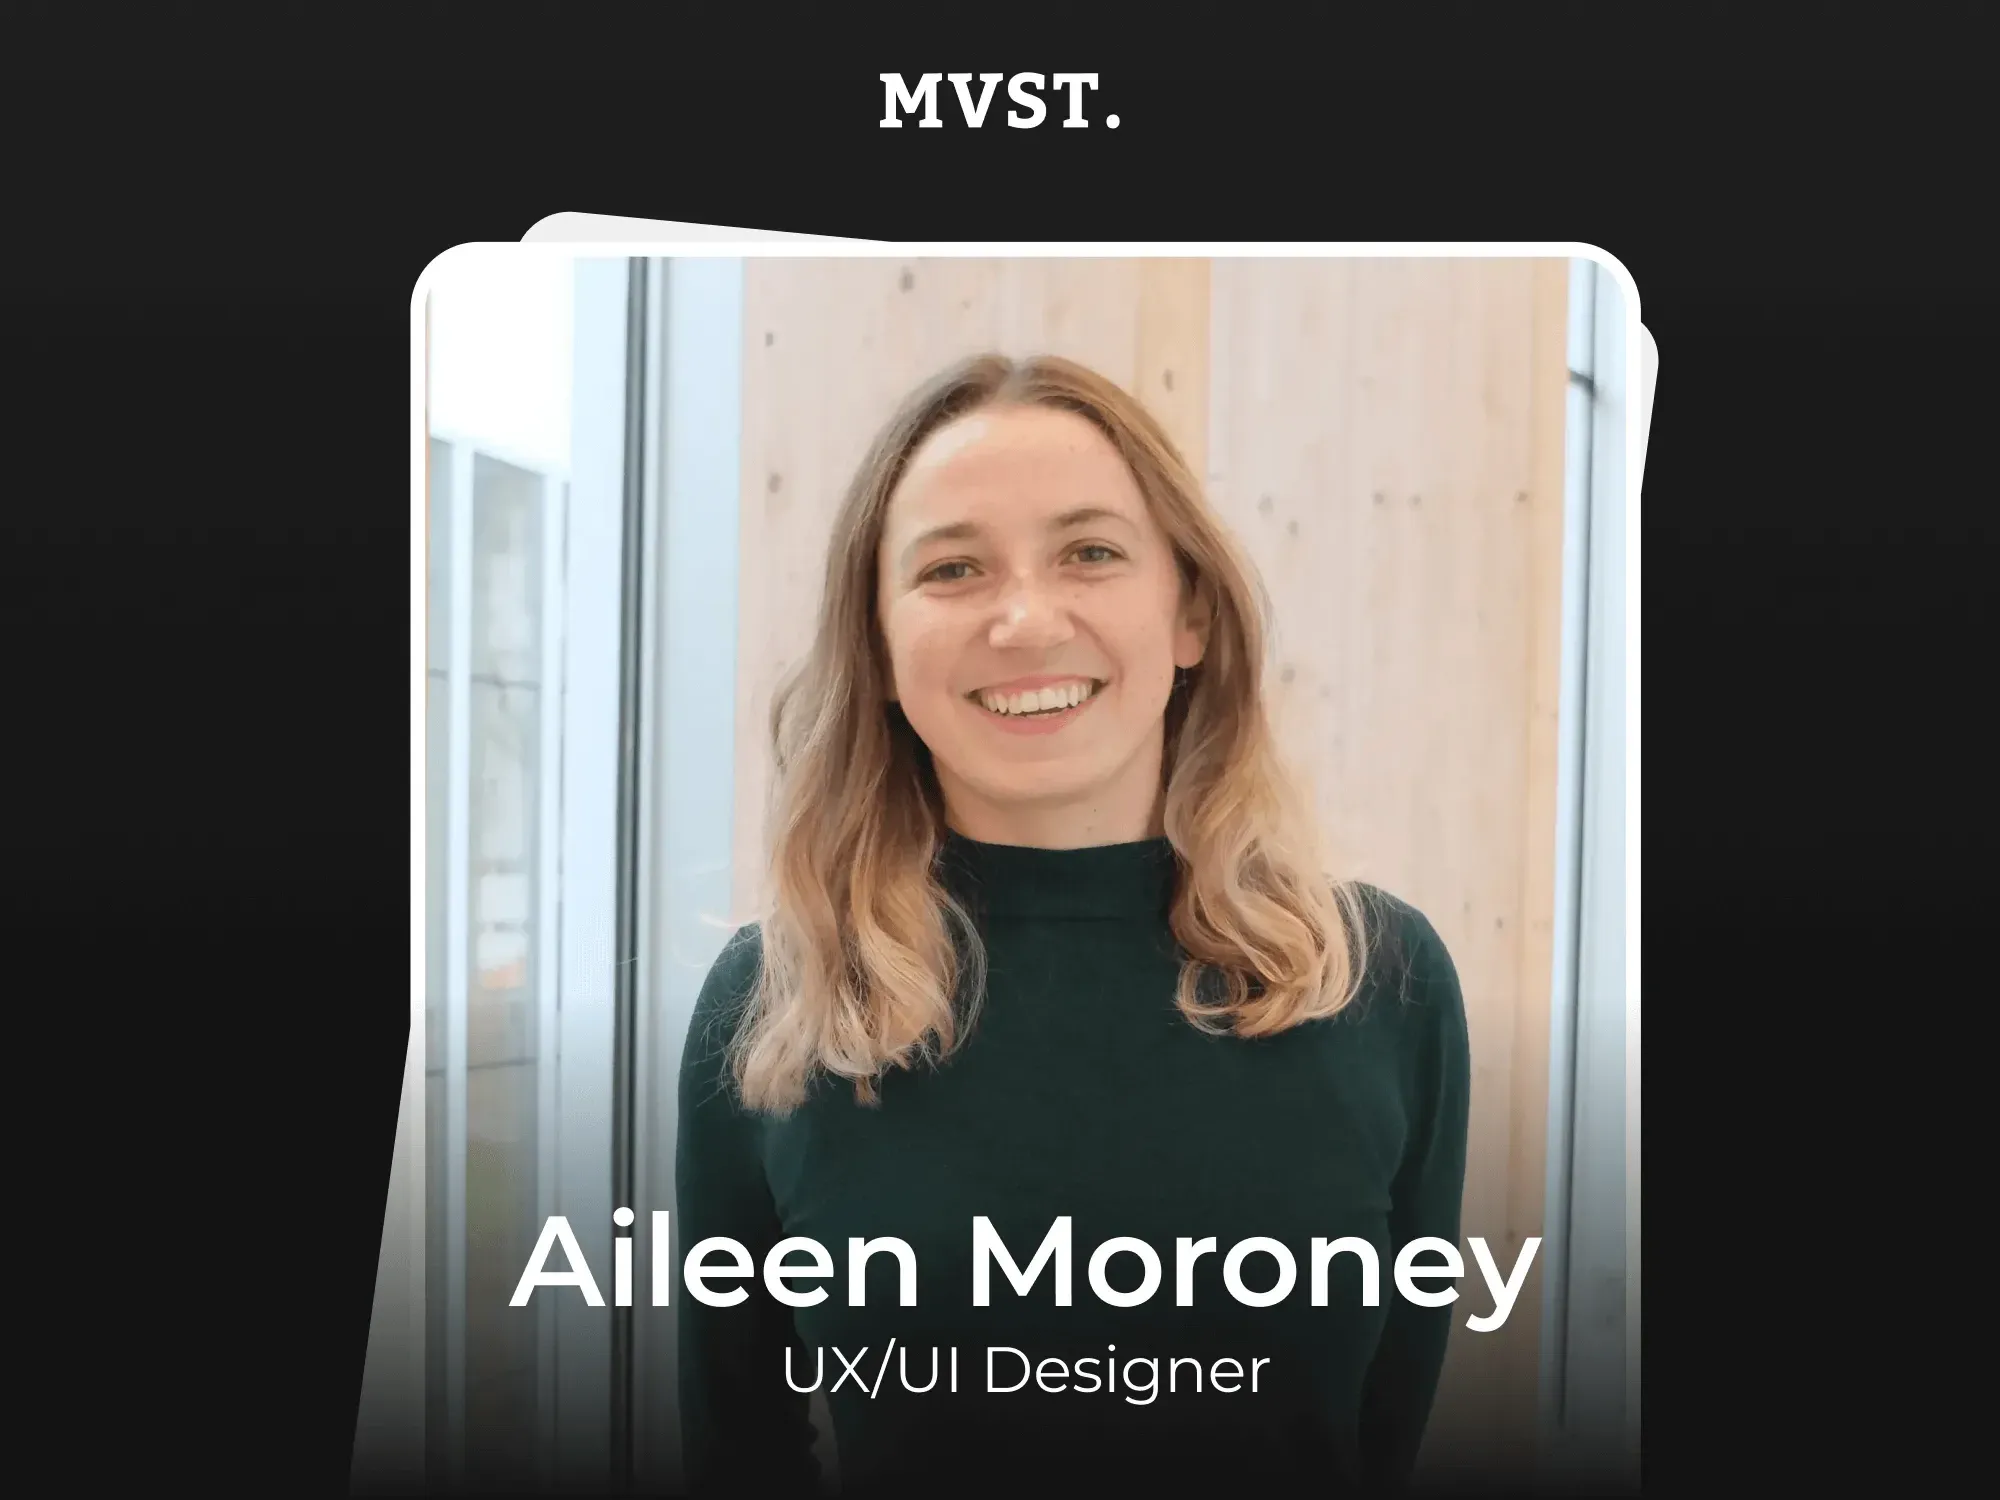 Welcome to MVST, Aileen!